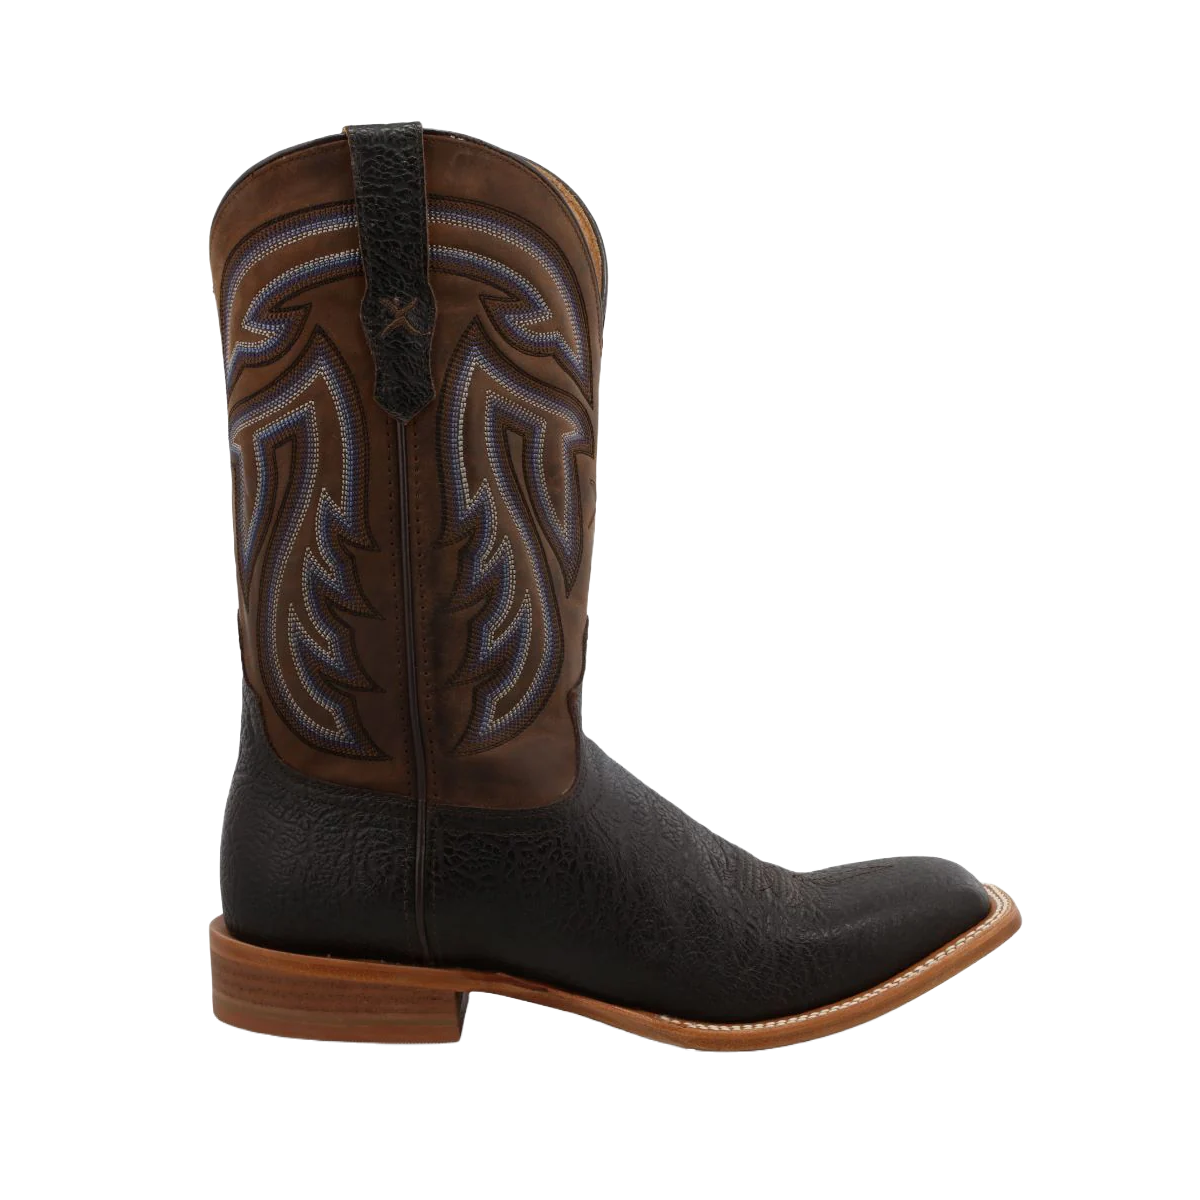 Twisted X Men's 12 Inch Rancher Black & Coffee Square Toe Boots MRAL023